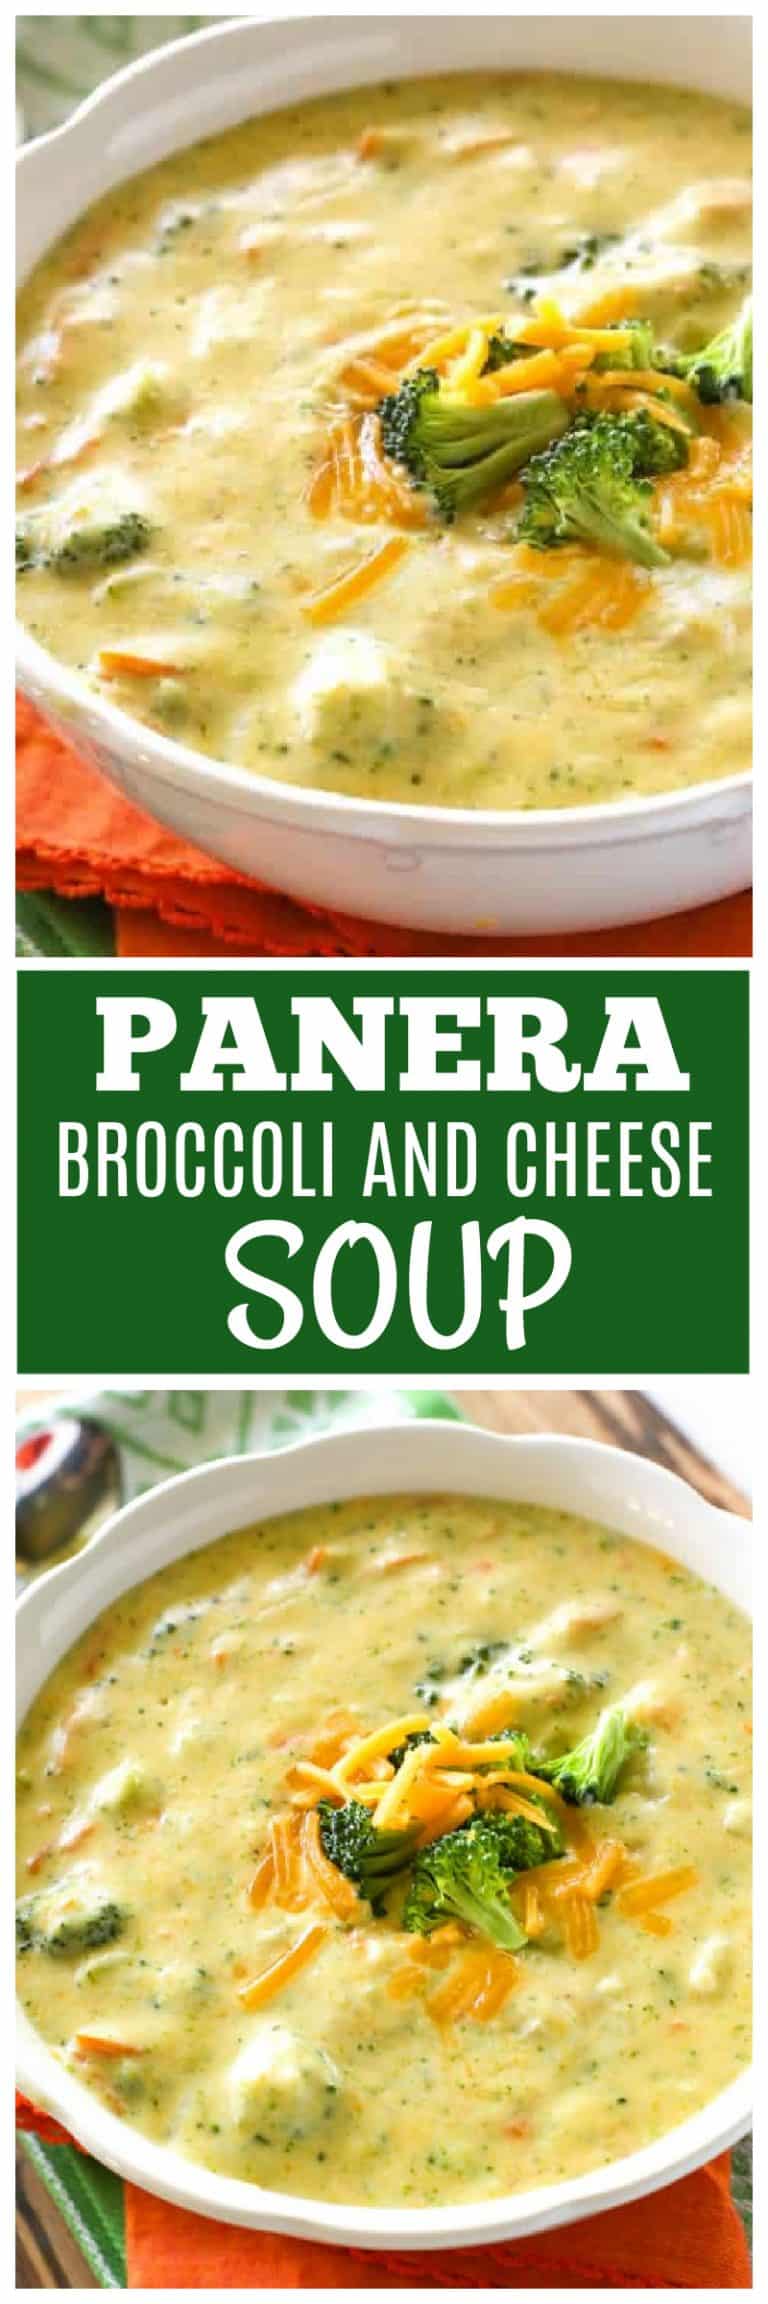 Panera's Broccoli Cheddar Soup {+VIDEO} - The Girl Who Ate Everything